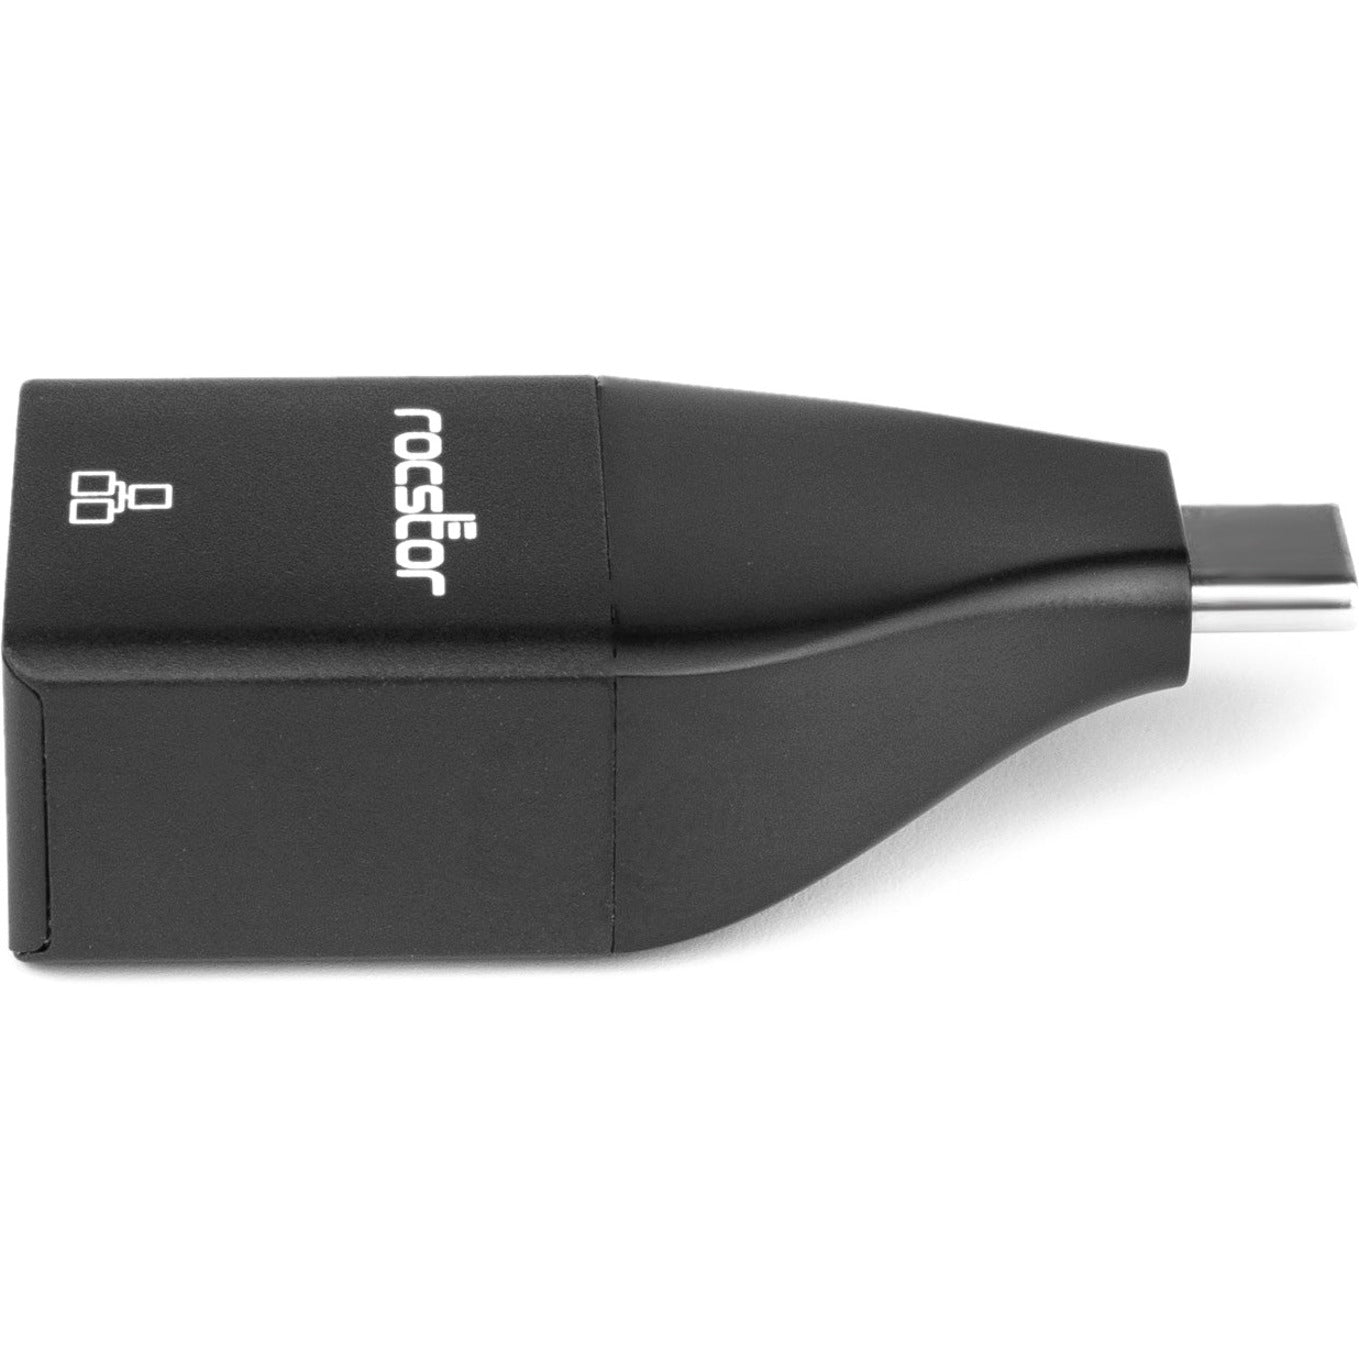 Rocstor Y10A240-A1 USB-C to Gigabit Ethernet Network Adapter, High-Speed Data Transfer, Plug and Play